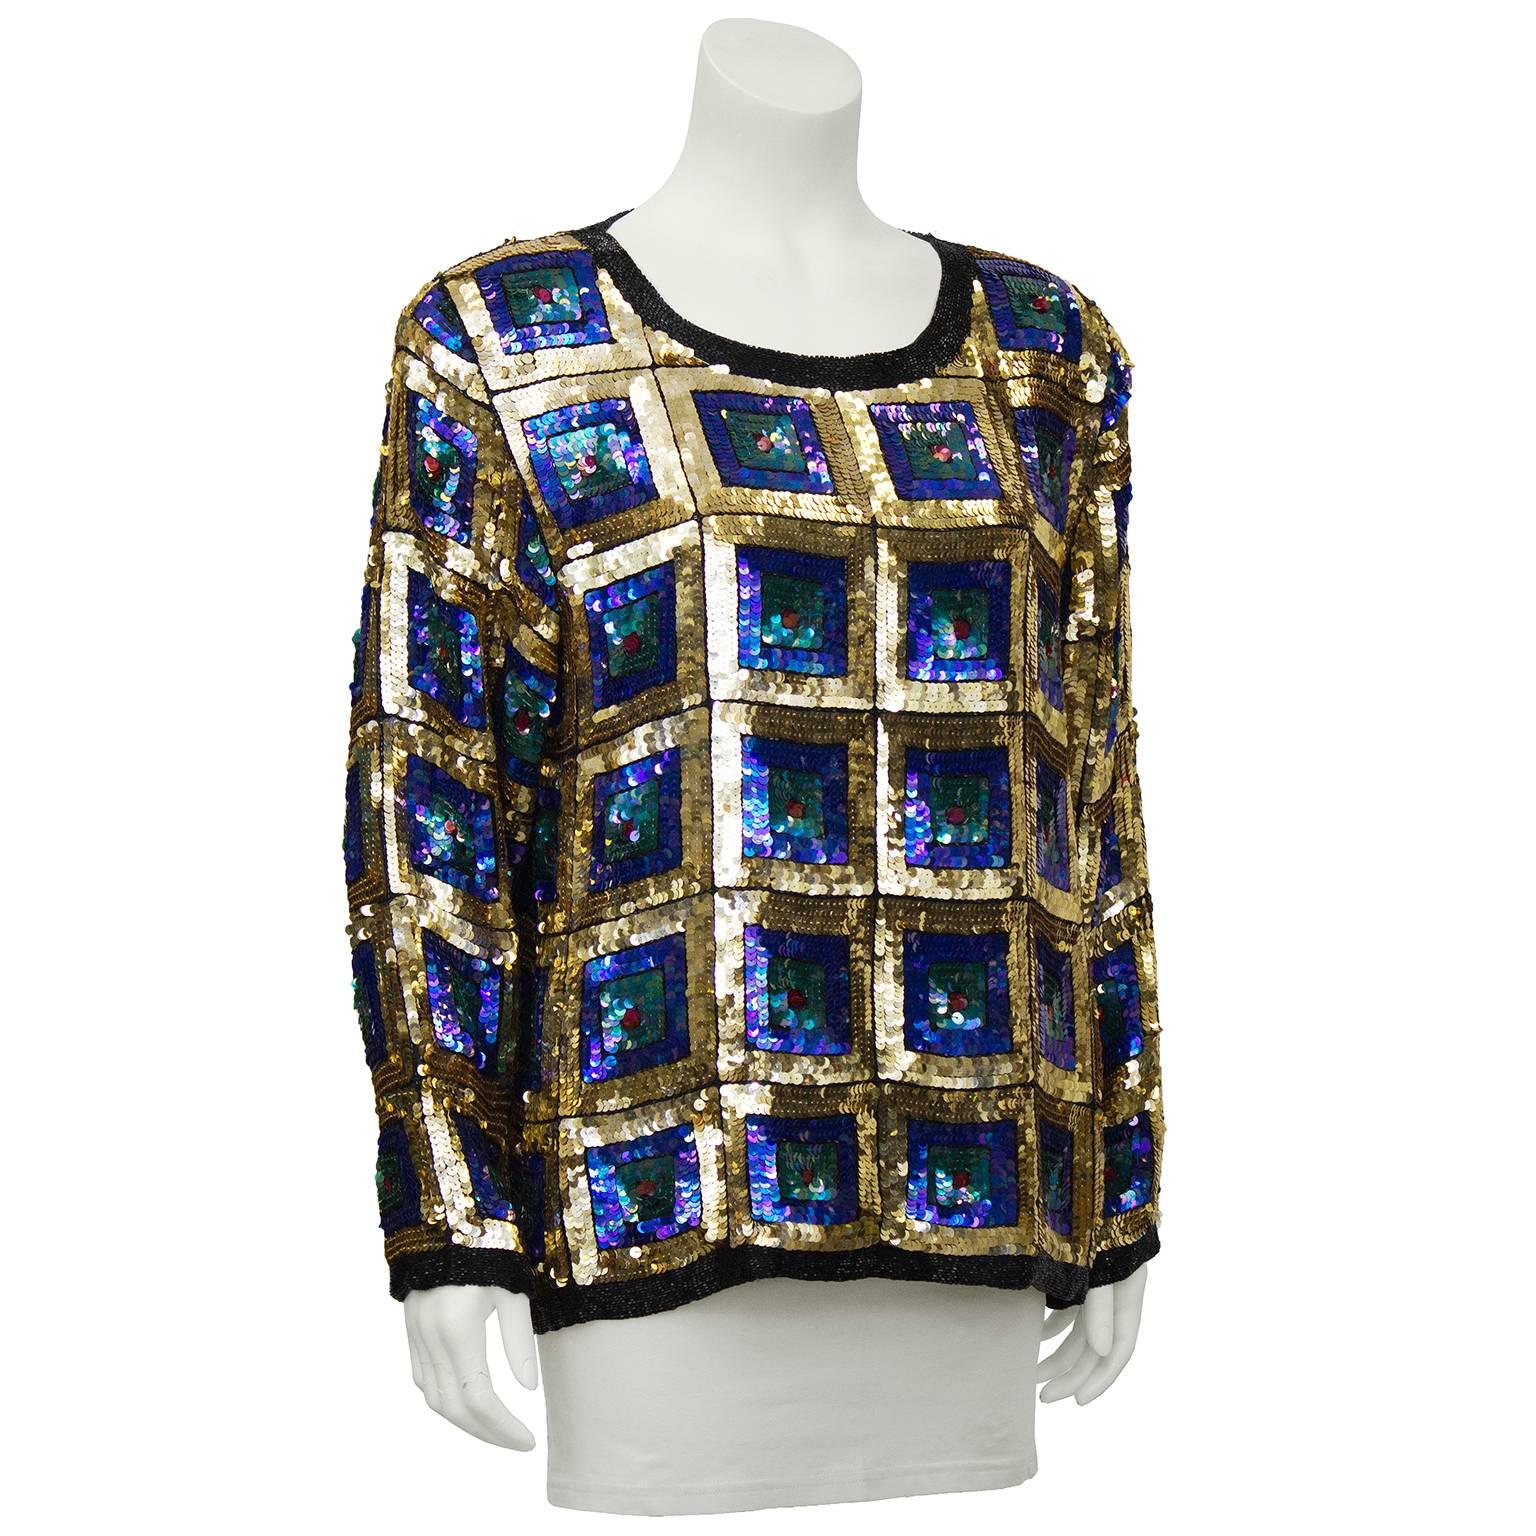 So hard to resist 1970's hand made in India gold sequin on chiffon pull over top. Square pattern with inset iridescent blue sequins outlined in black. In excellent vintage condition. Fits like a US 6.

Shoulder 19